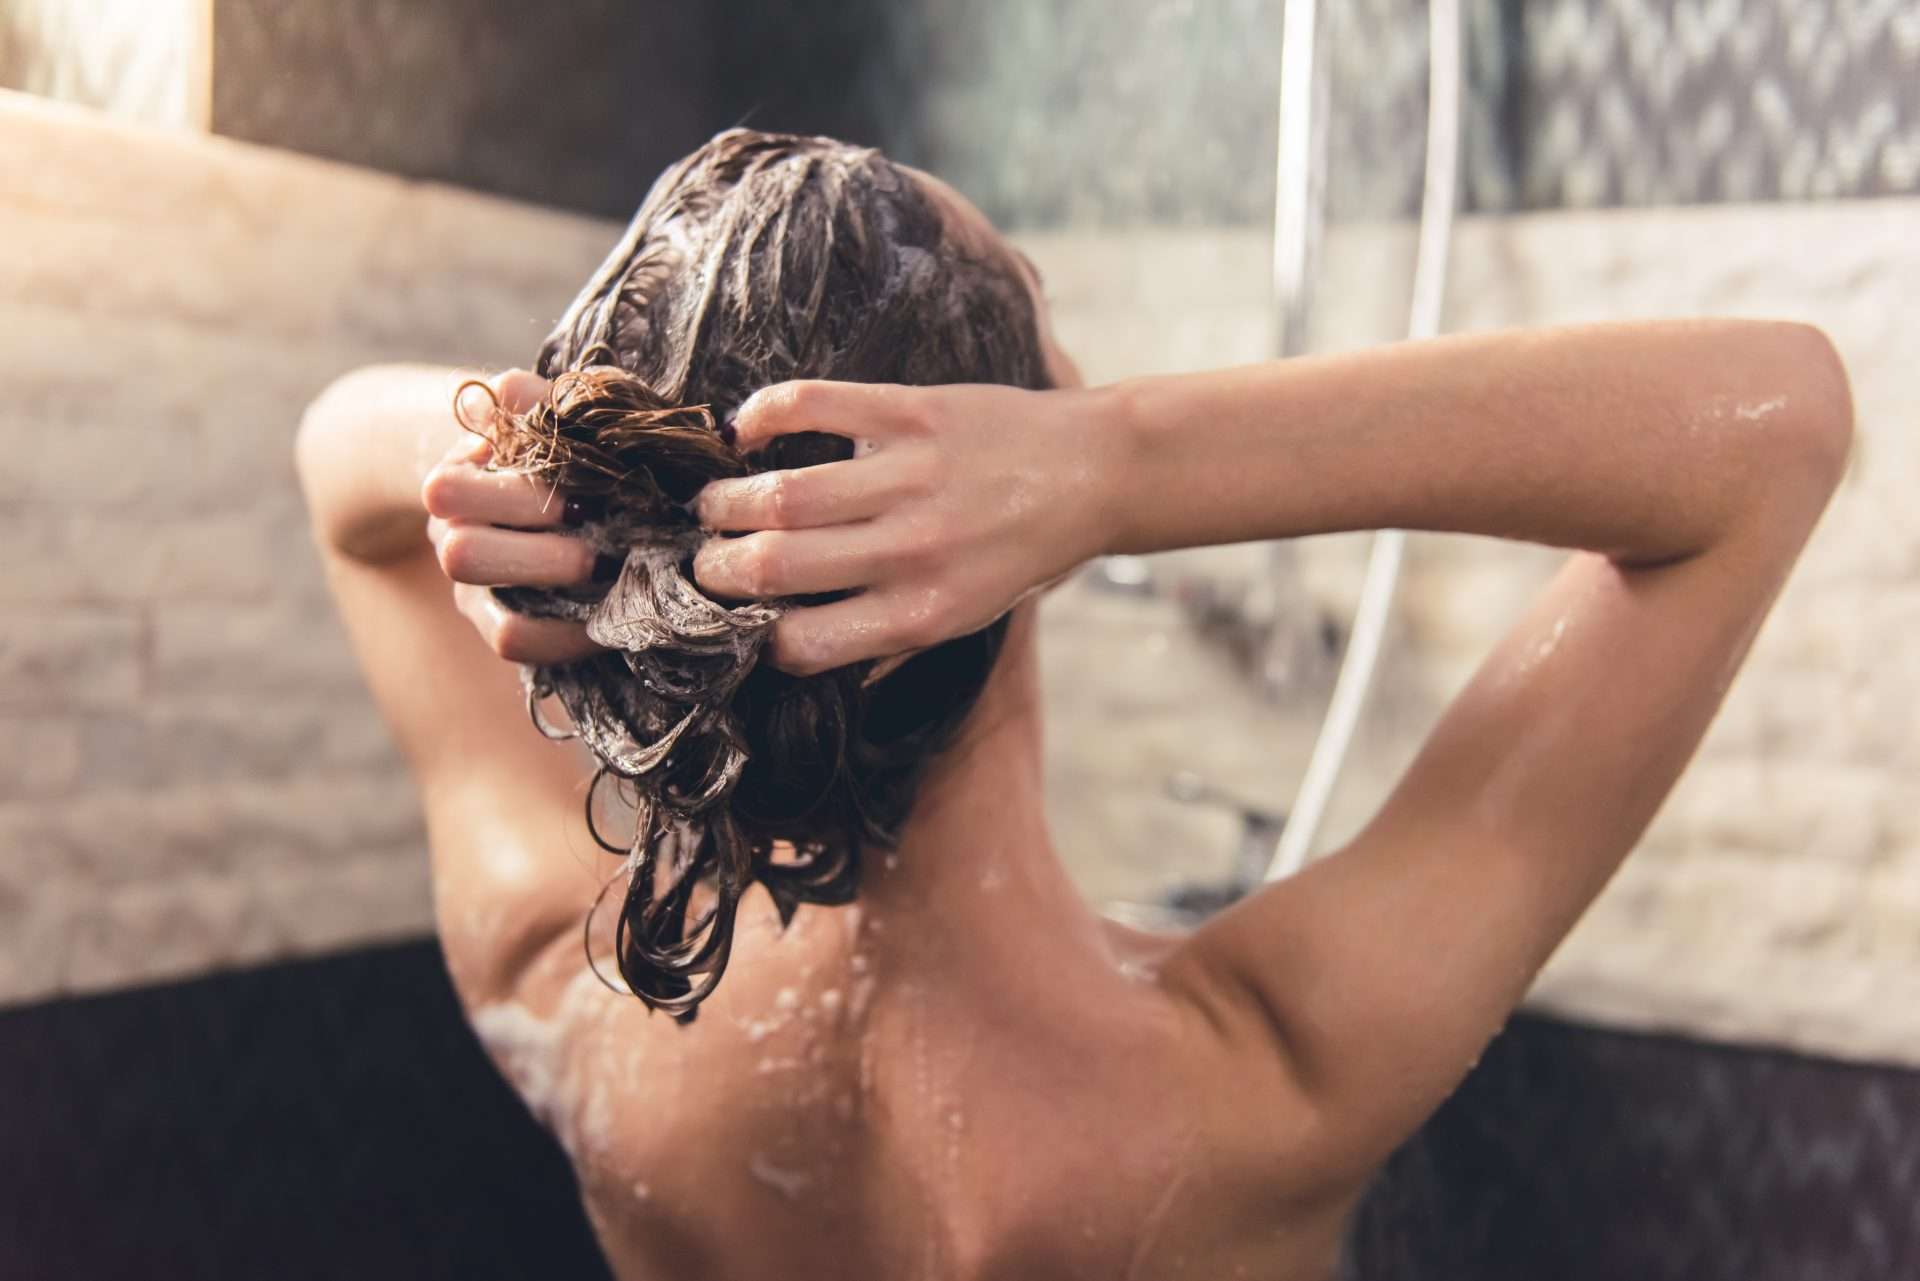 Woman shampooing hair in campground shower